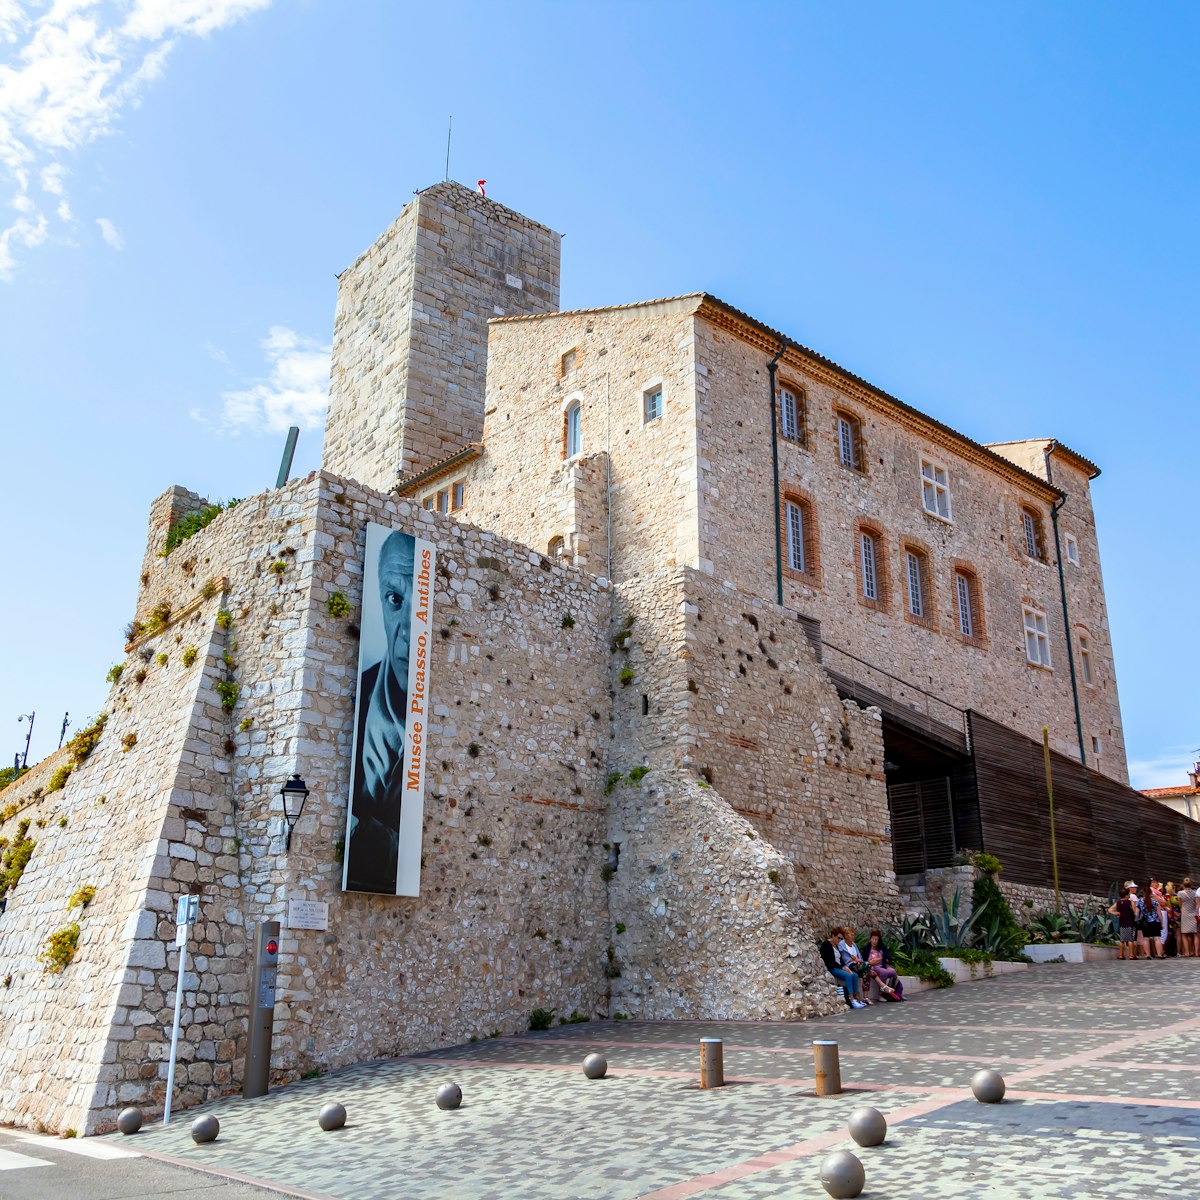 The Picasso Museum at Grimaldi Castle in Antibes, France.